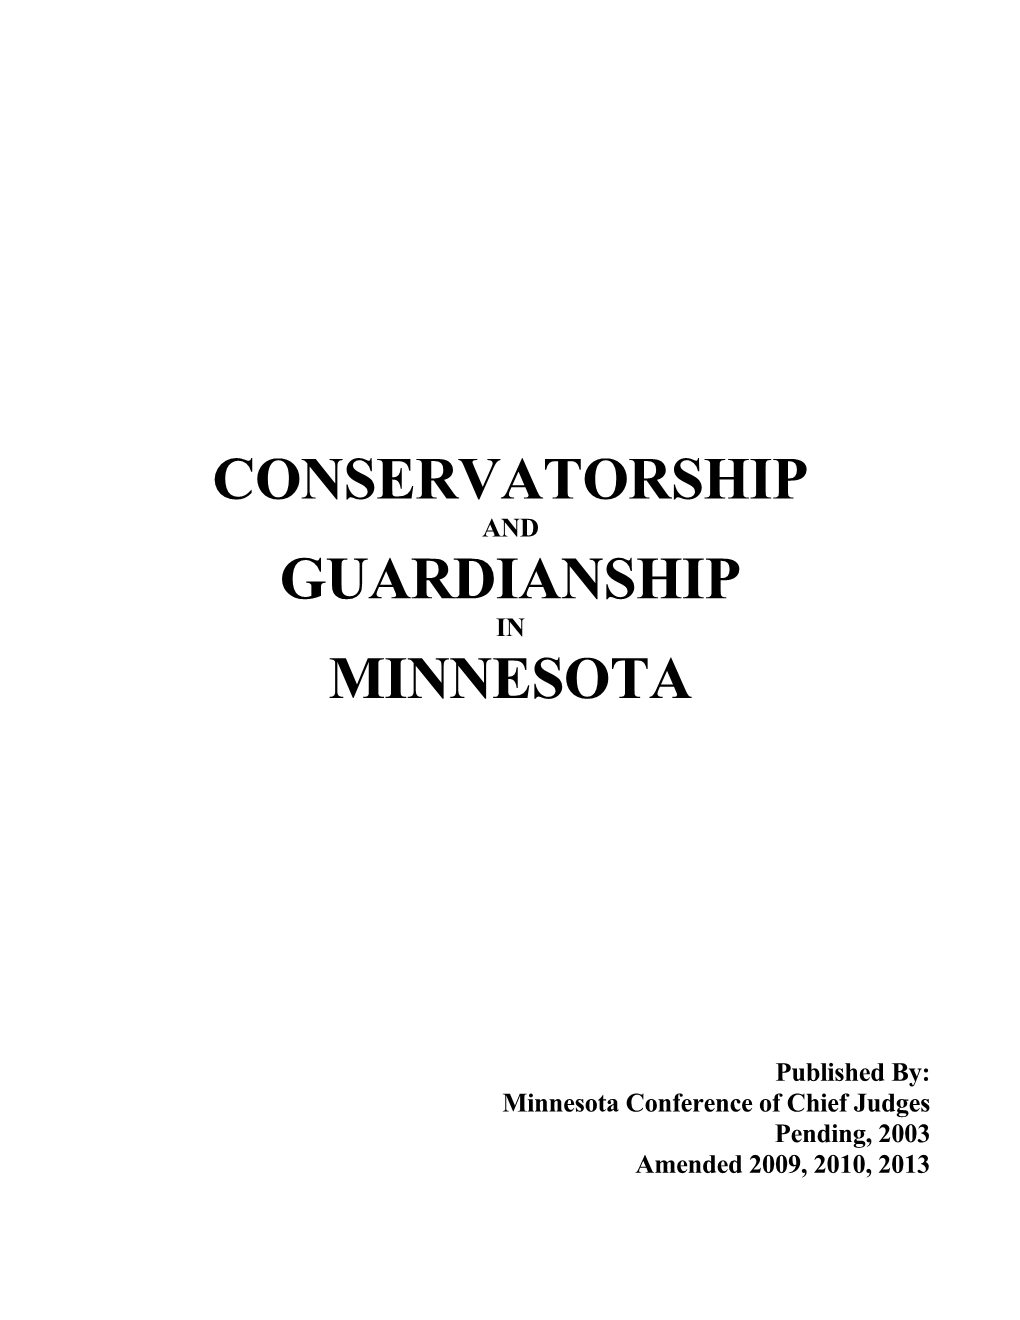 Minnesota Conference of Chief Judges